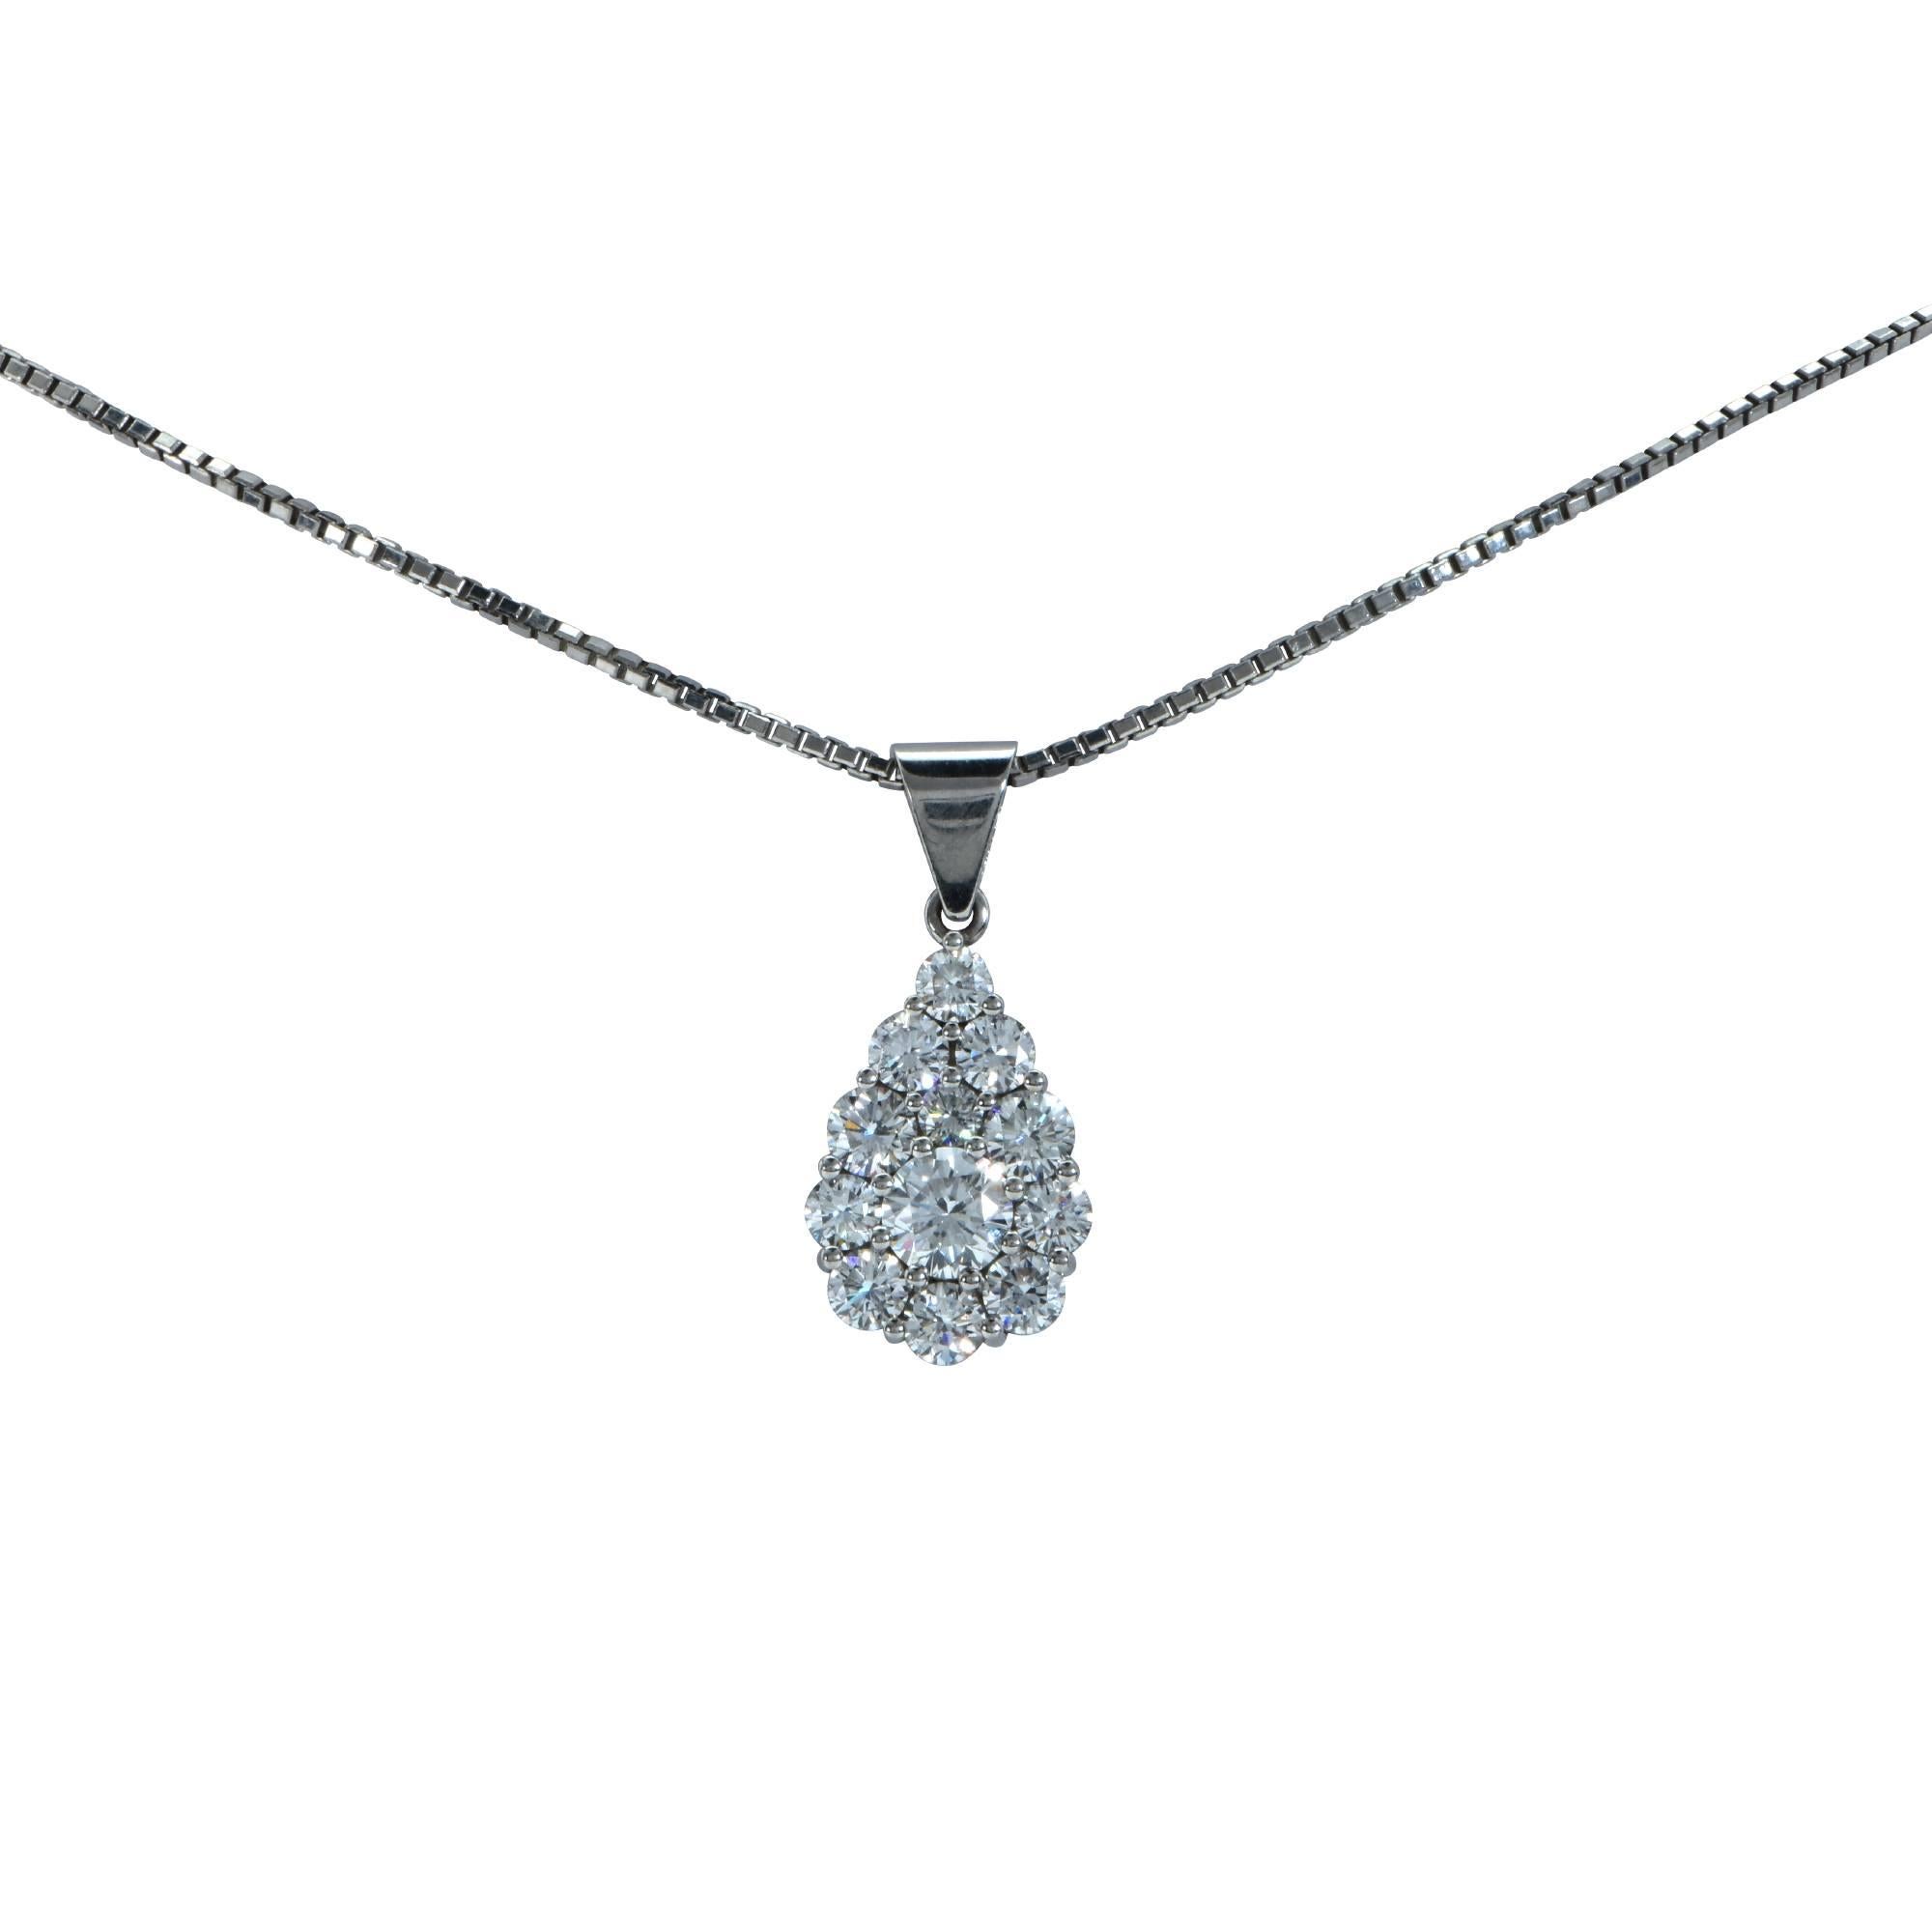 Platinum handmade pendant containing 12 round brilliant cut diamonds weighing approximately 2cts F color VS clarity.

Measurements are available upon request.
It is stamped and/or tested as platinum.
The metal weight is 7.93 grams.

Our pieces are